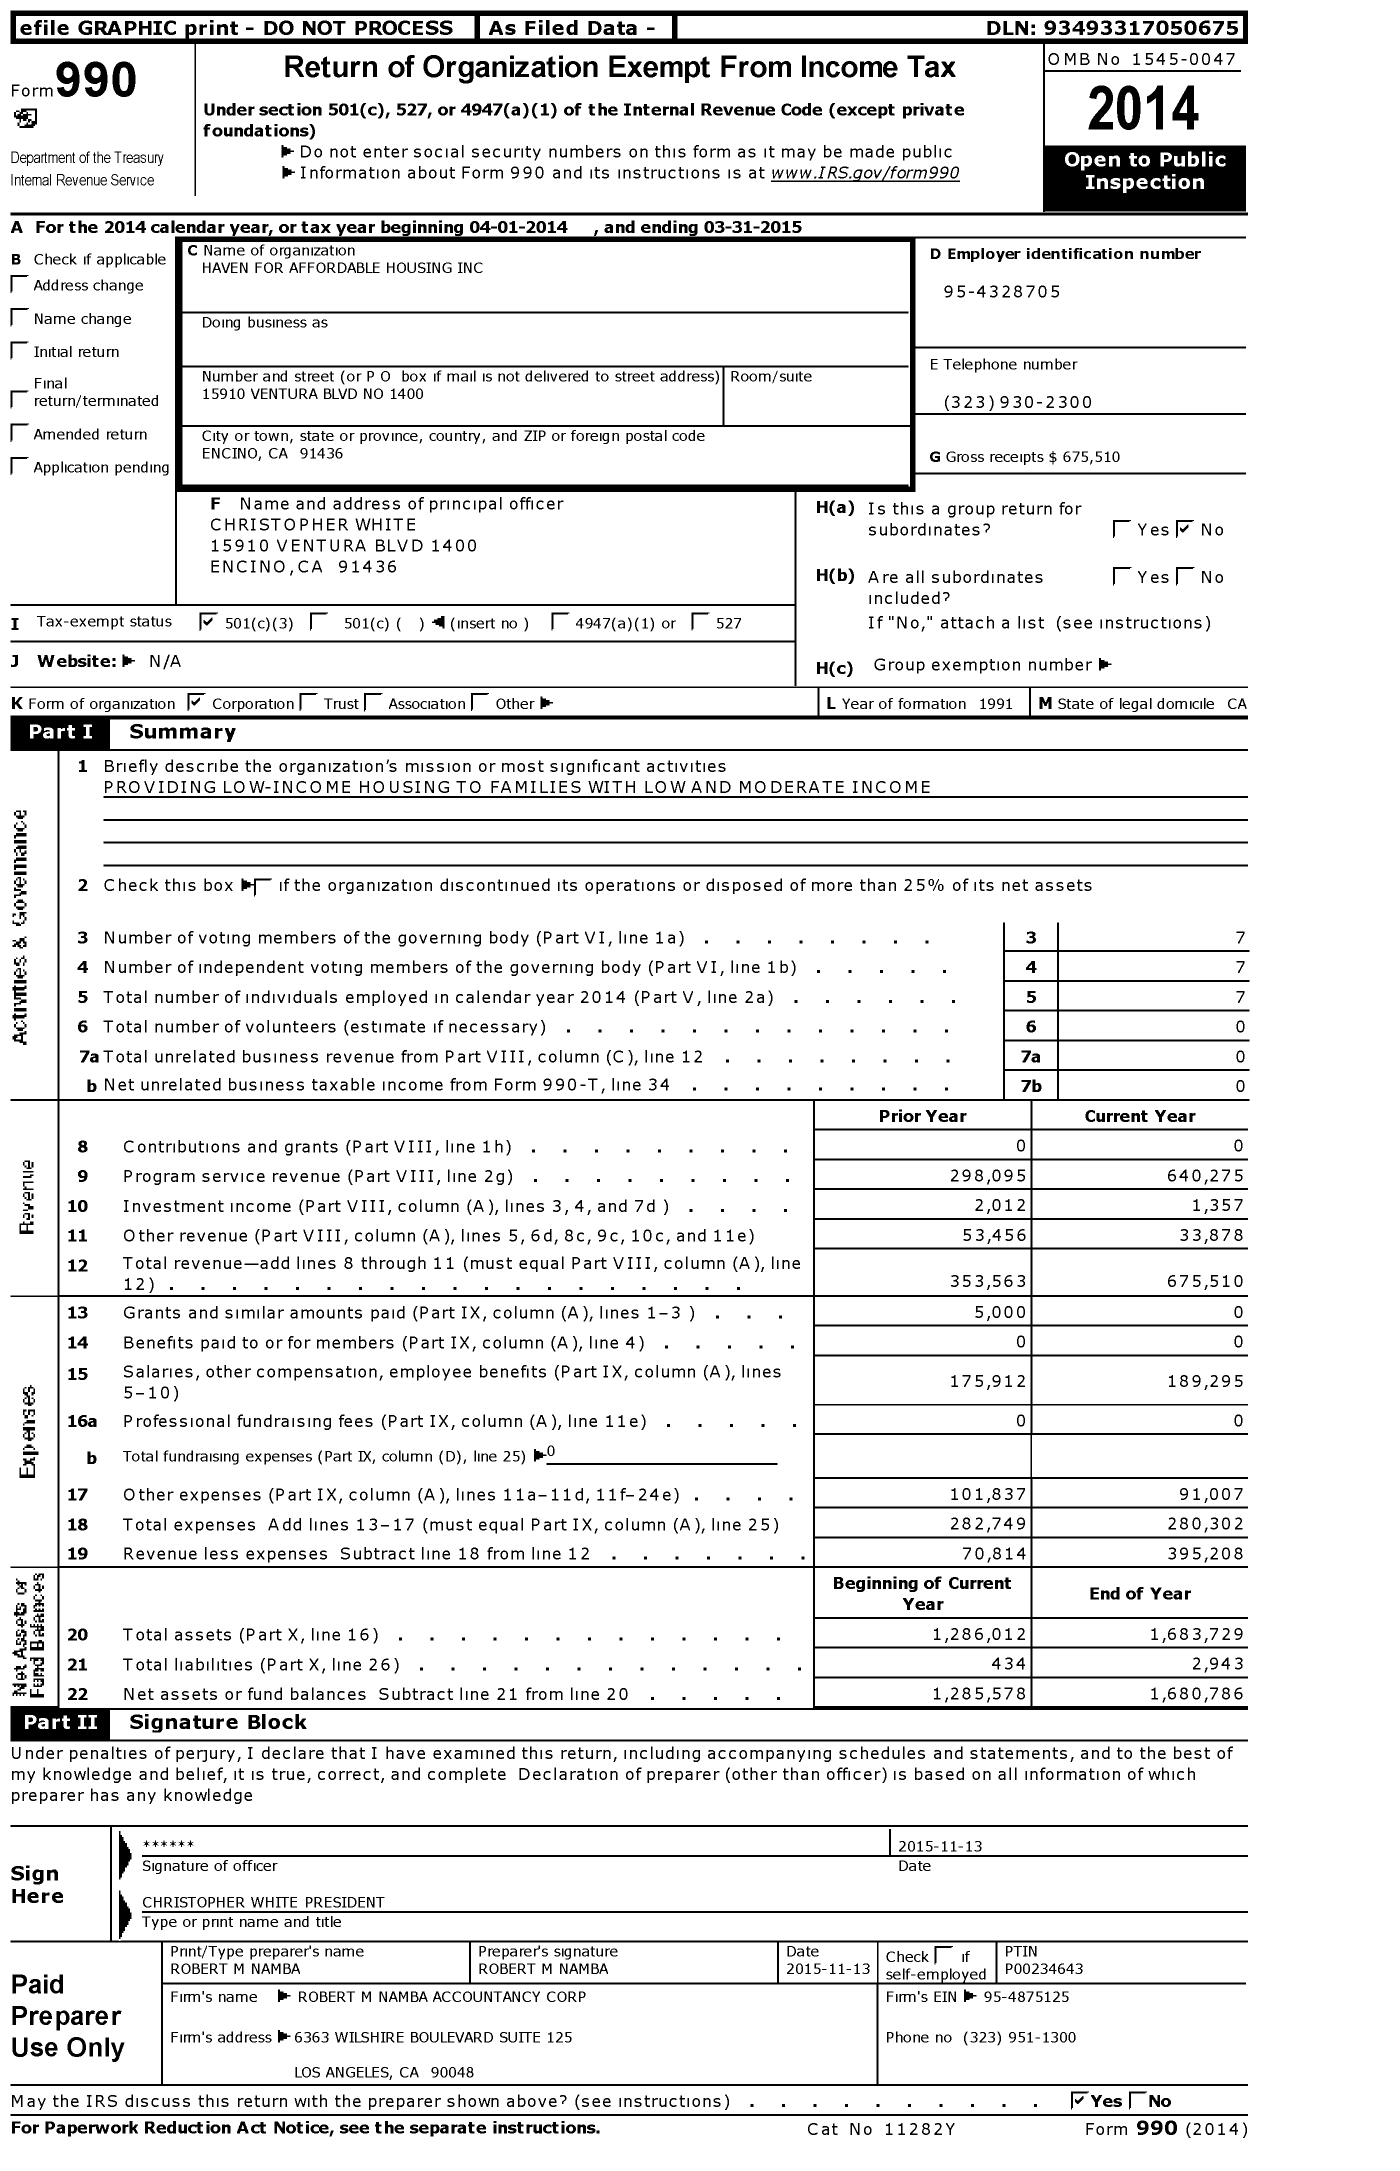 Image of first page of 2014 Form 990 for Haven for Affordable Housing